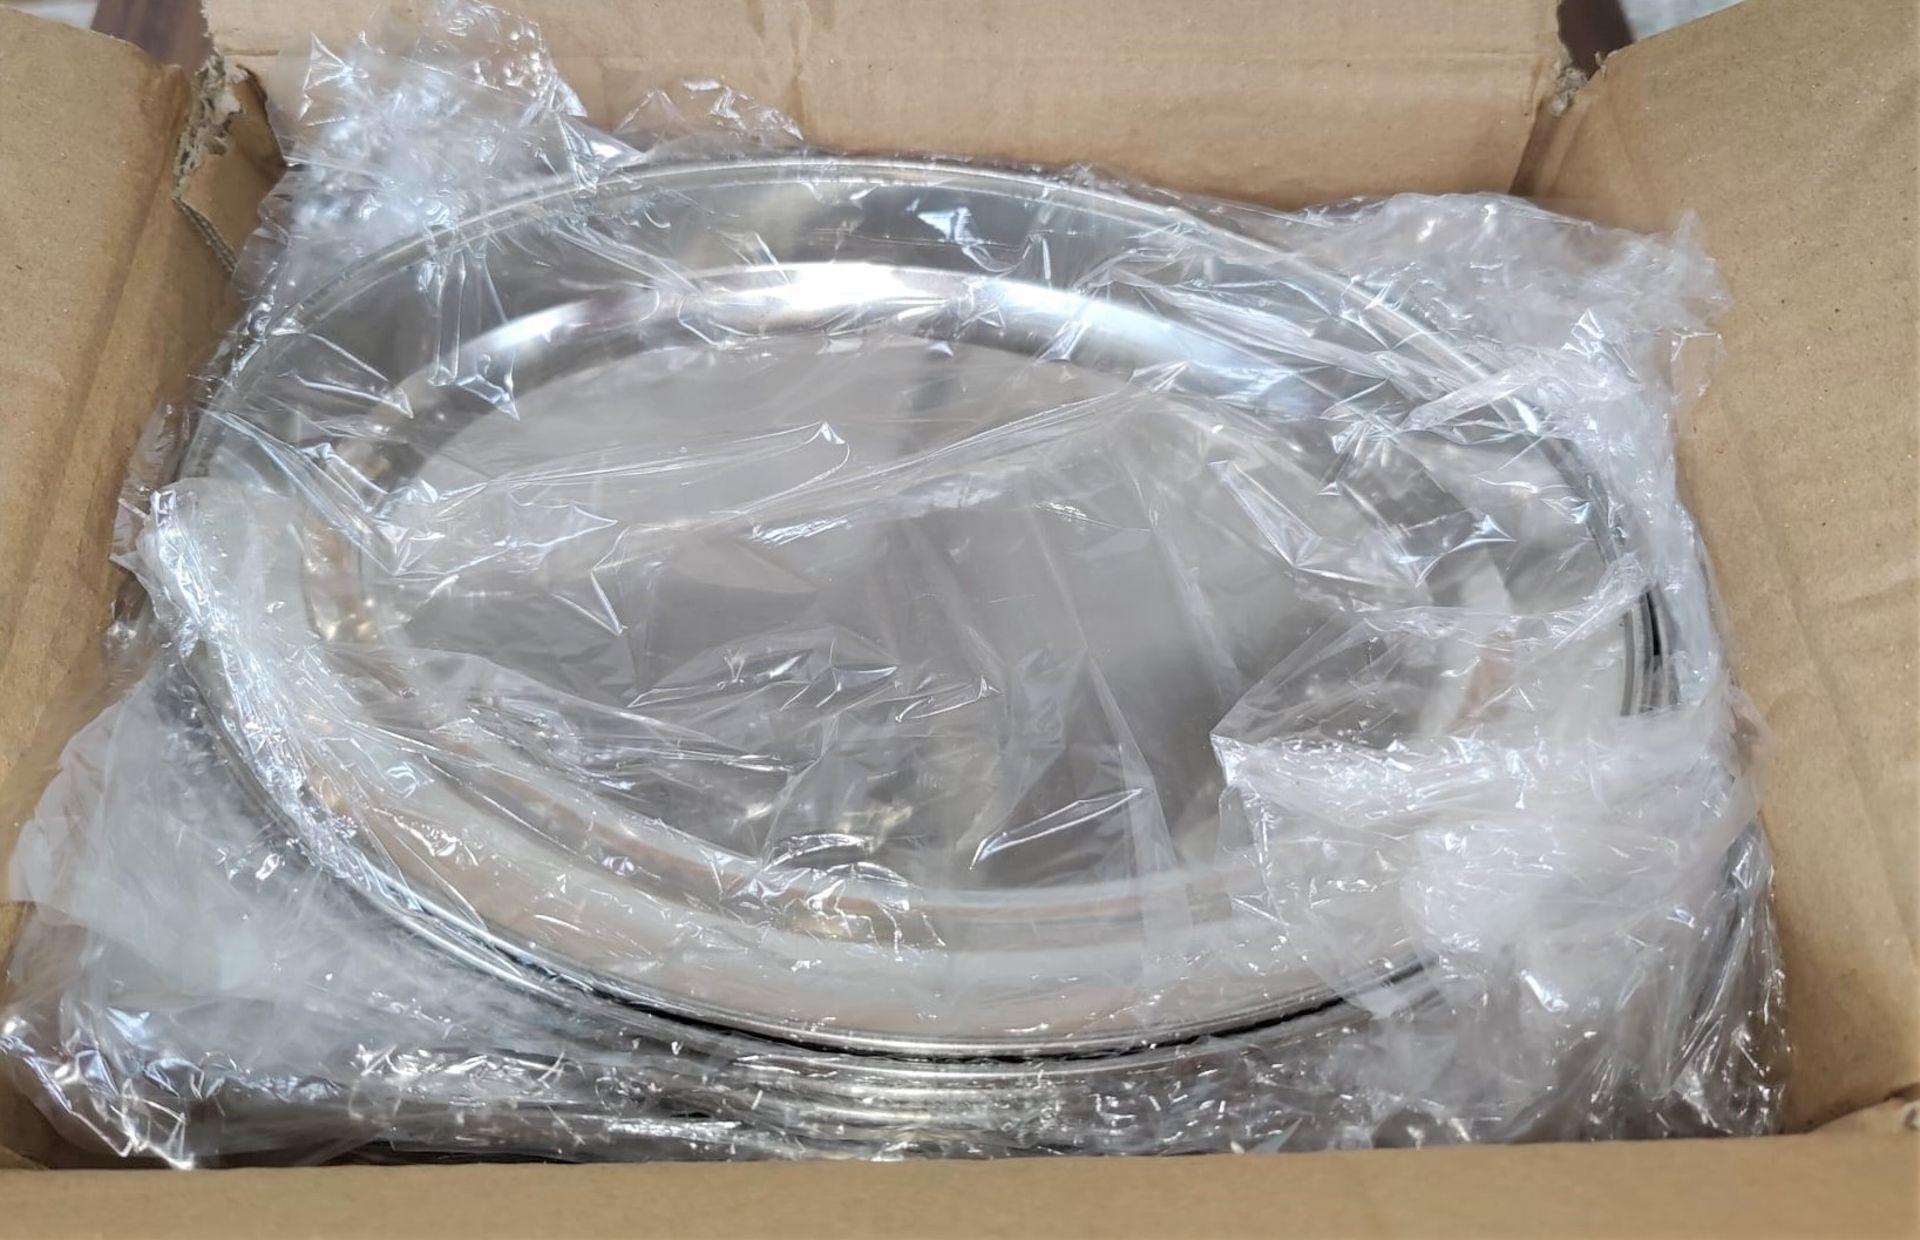 18 x Stainless Steel Small Oval Service Trays - Size: 255mm x 180mm - Brand New Boxed Stock RRP £90 - Image 3 of 7